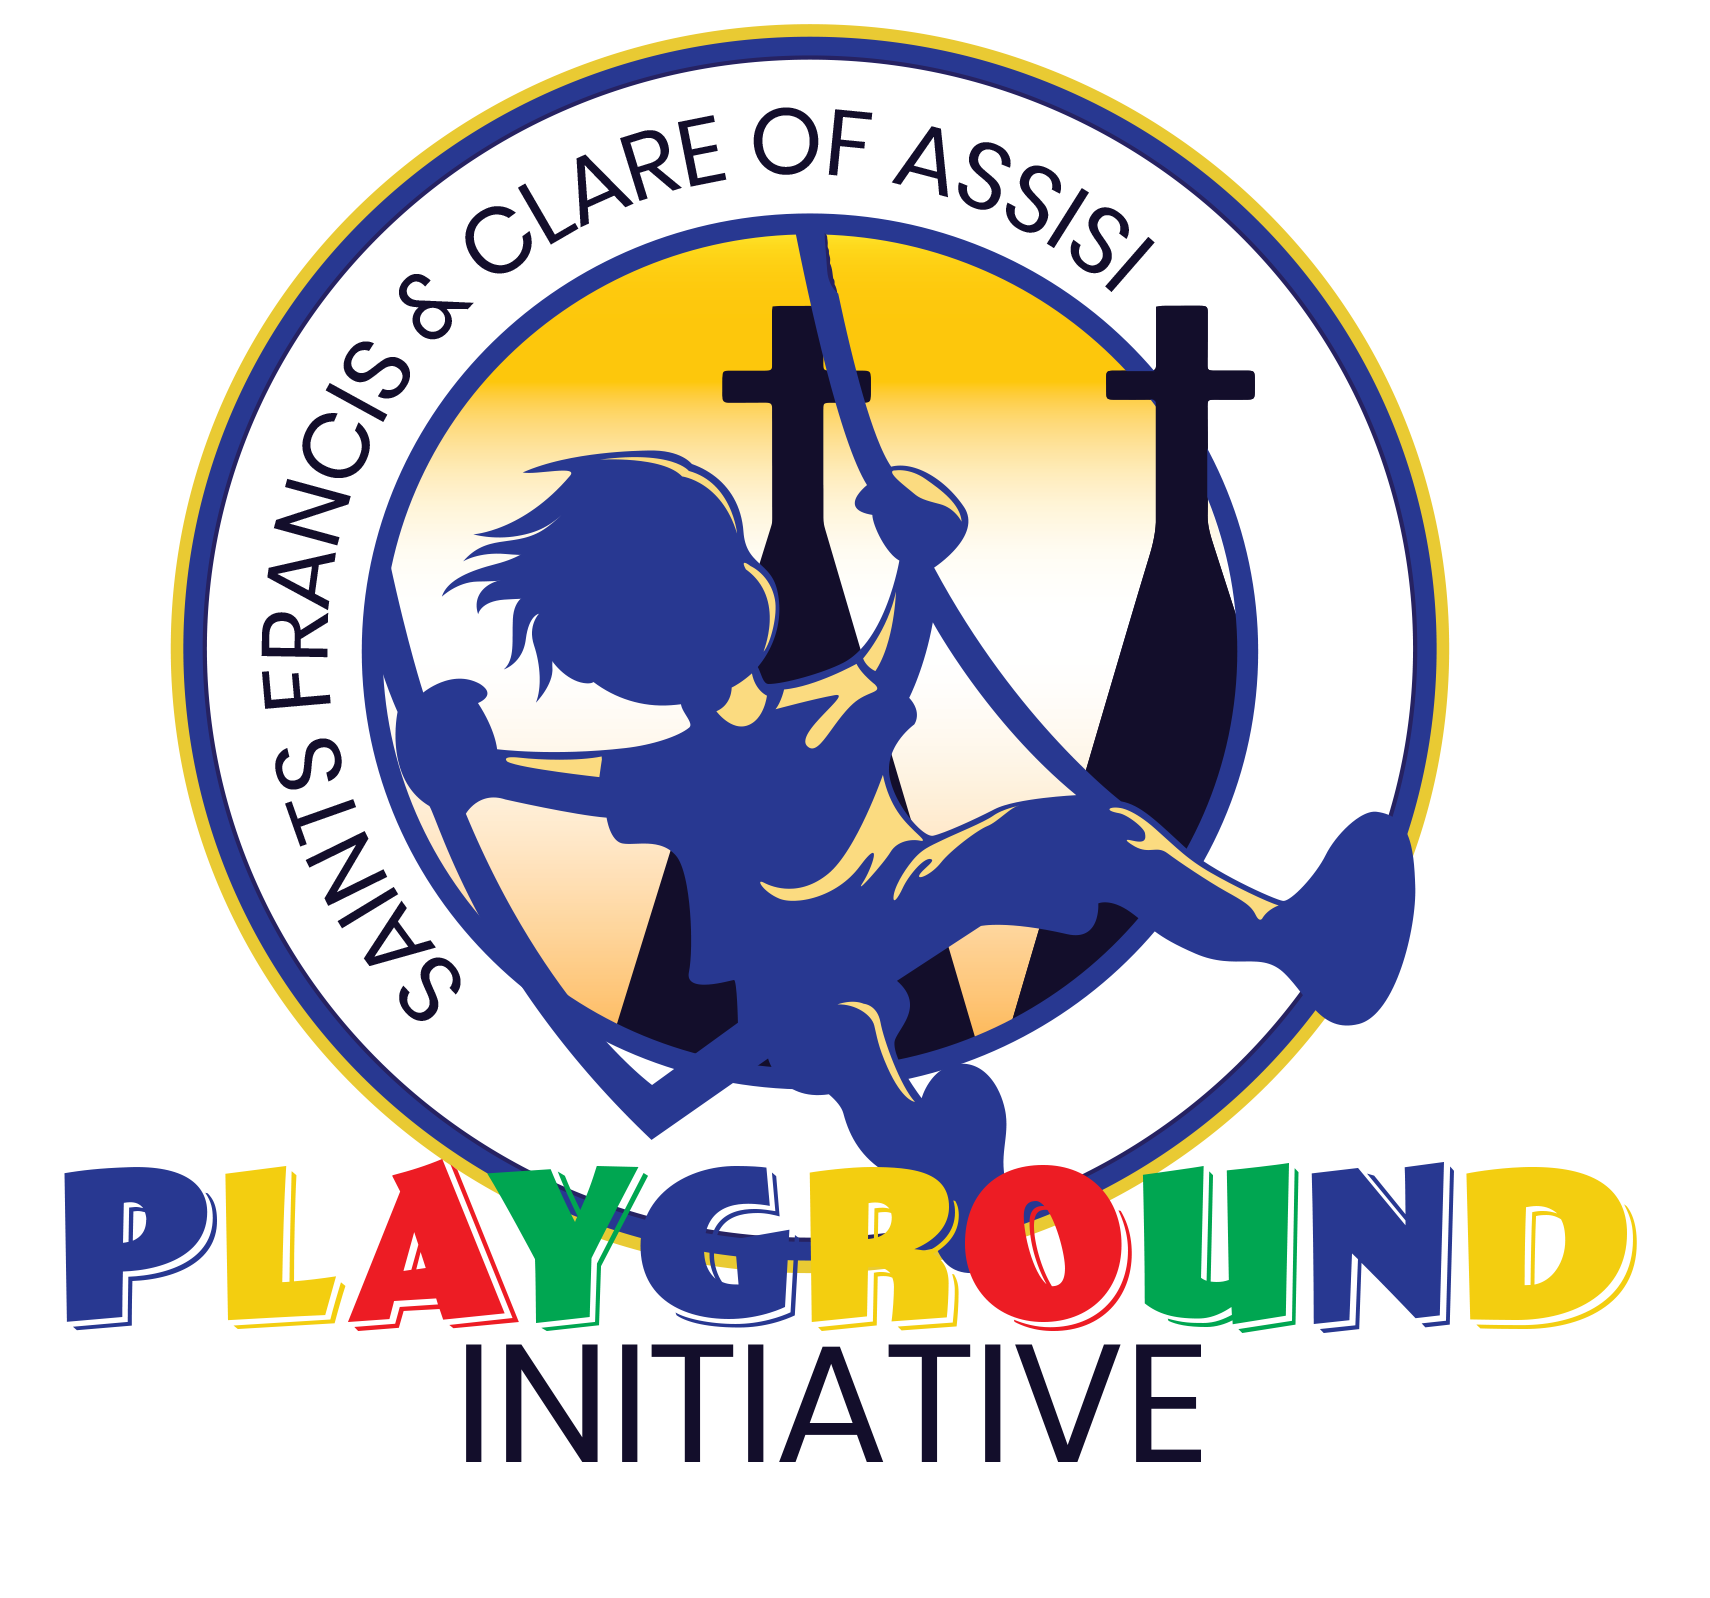 Saints Francis & Clare of Assisi Playground Initiative logo